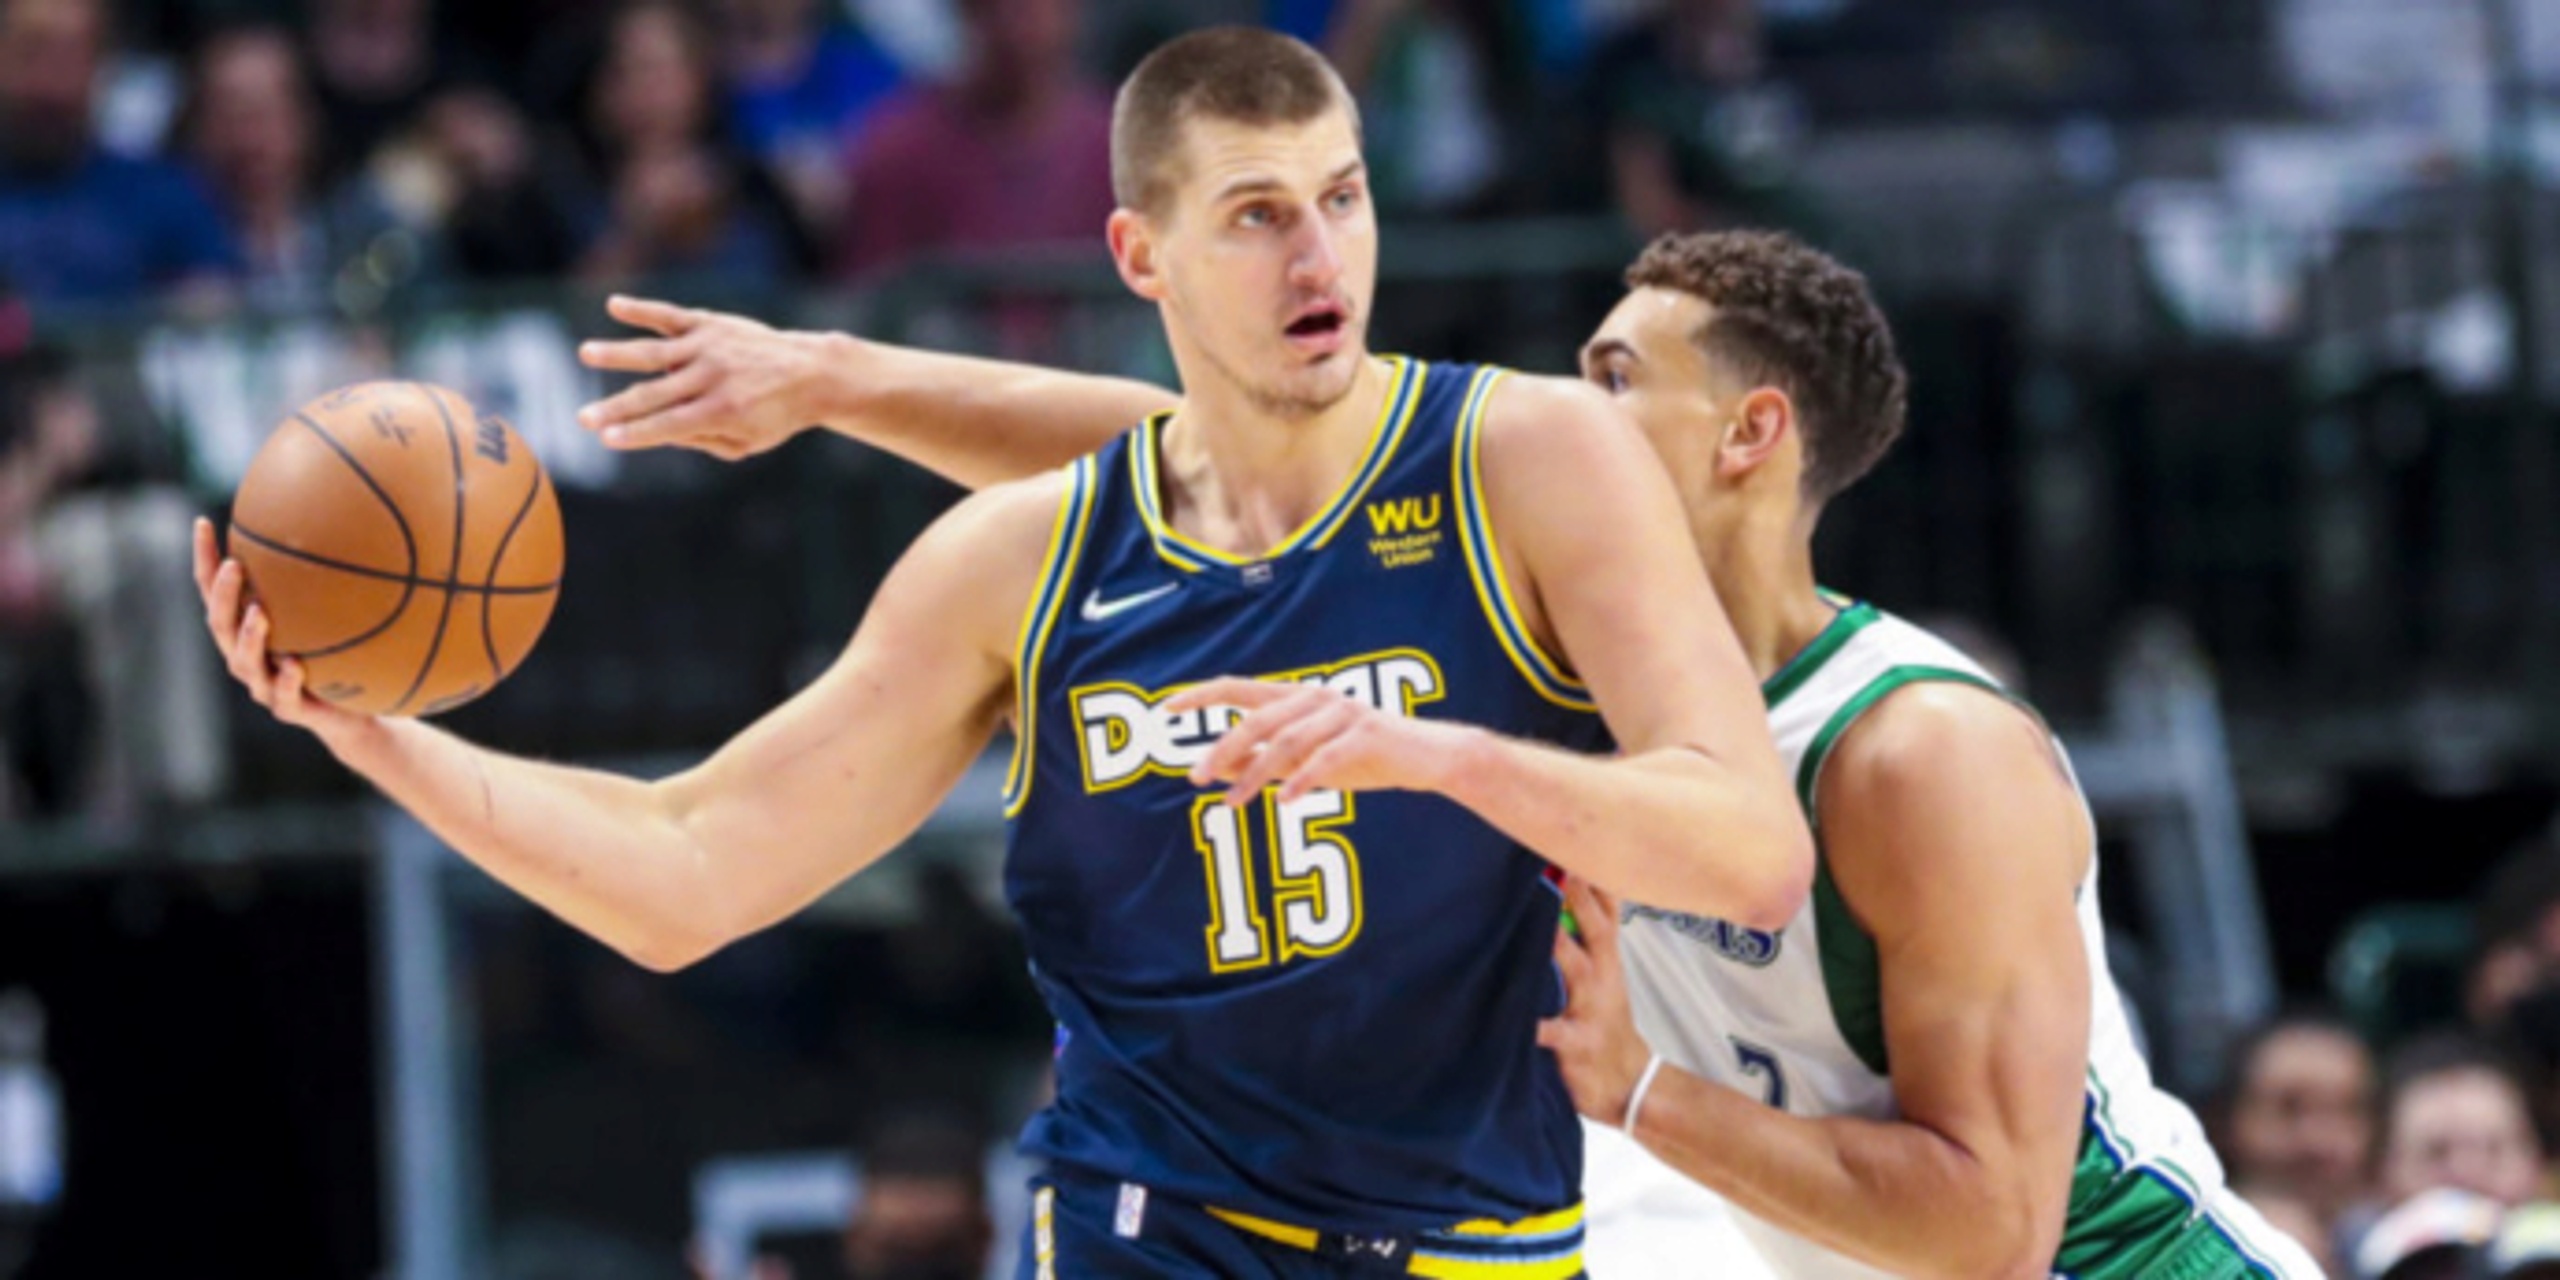 Darko Milicic feels Nikola Jokic is targeted as a foreign player